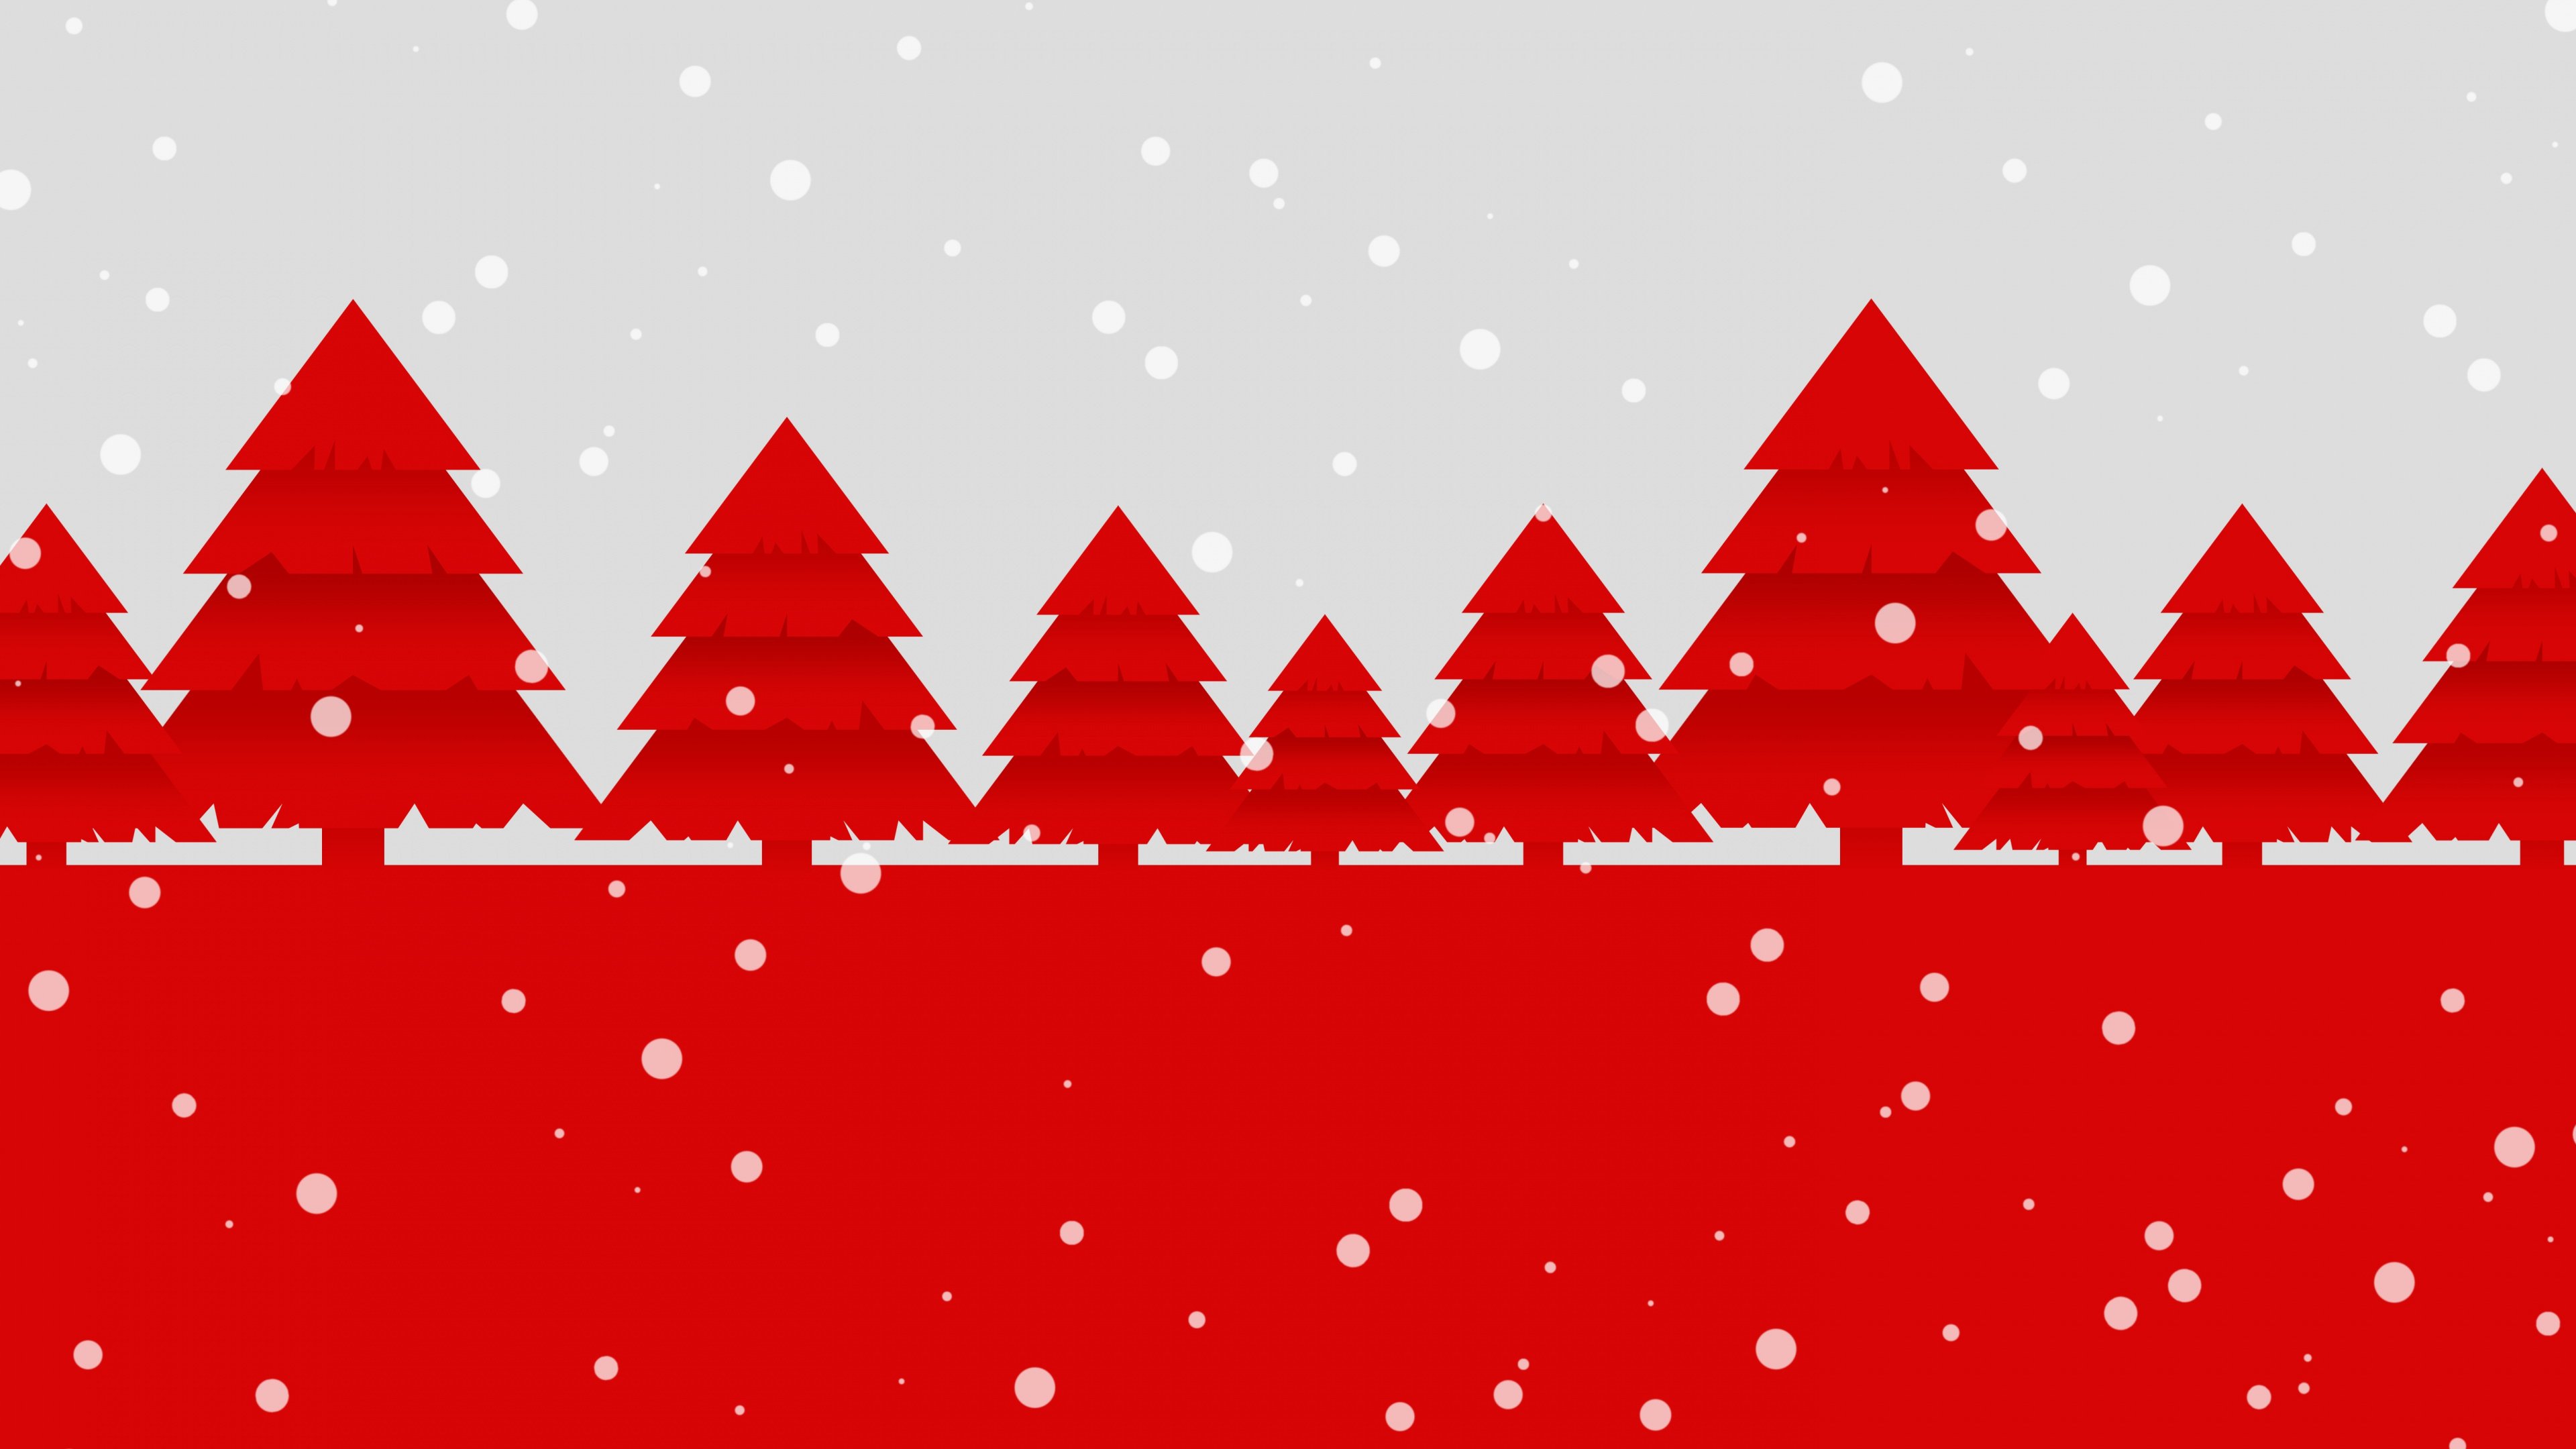 Download Red, pine trees, Christmas, abstract wallpaper, 3840x 4K UHD 16: Widescreen